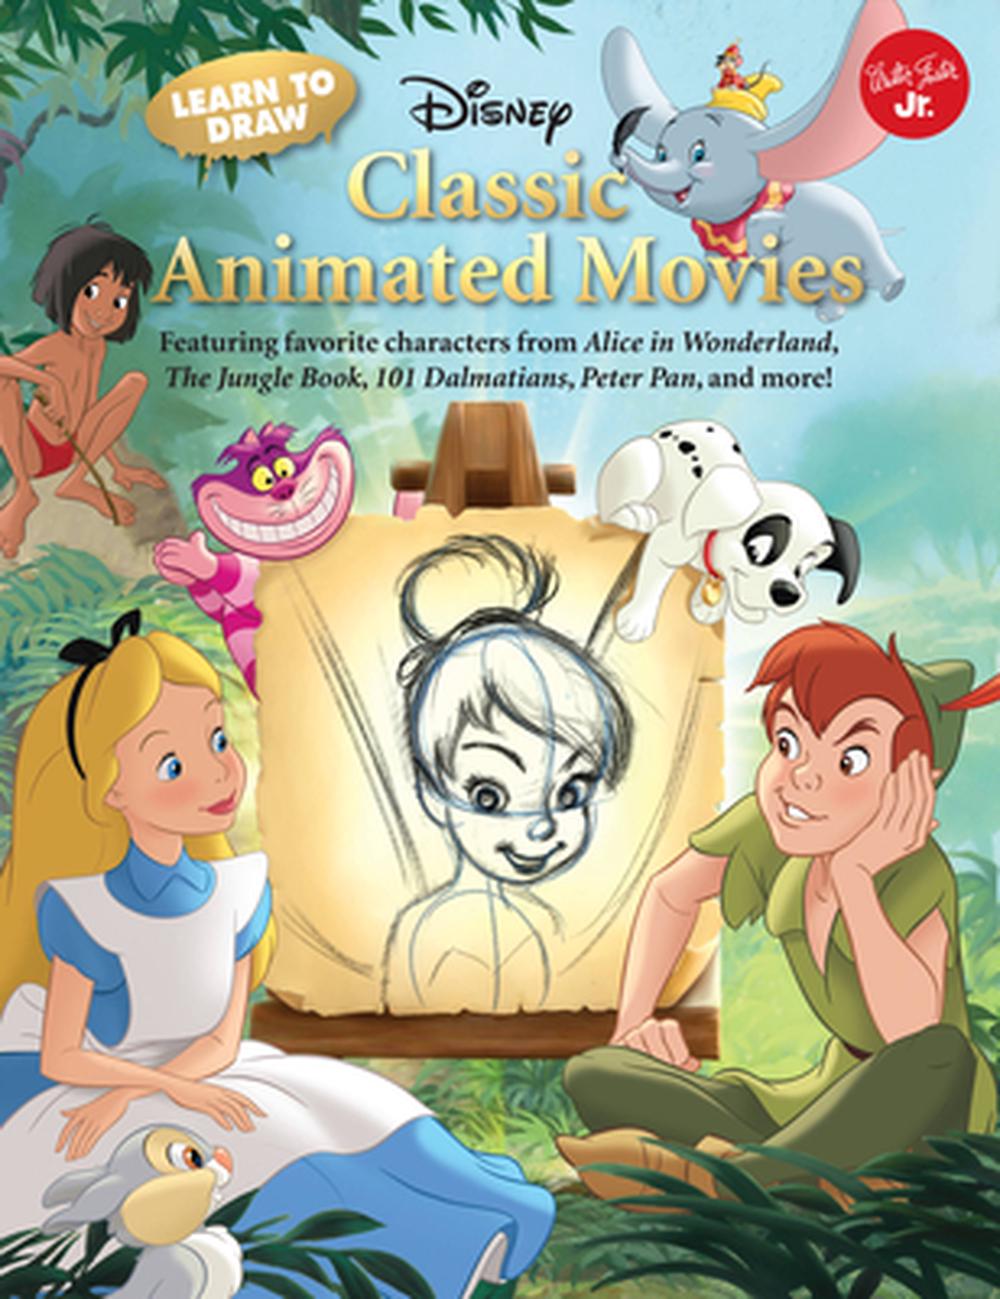 Learn to Draw Disney's Classic Animated Movies Featuring Favorite